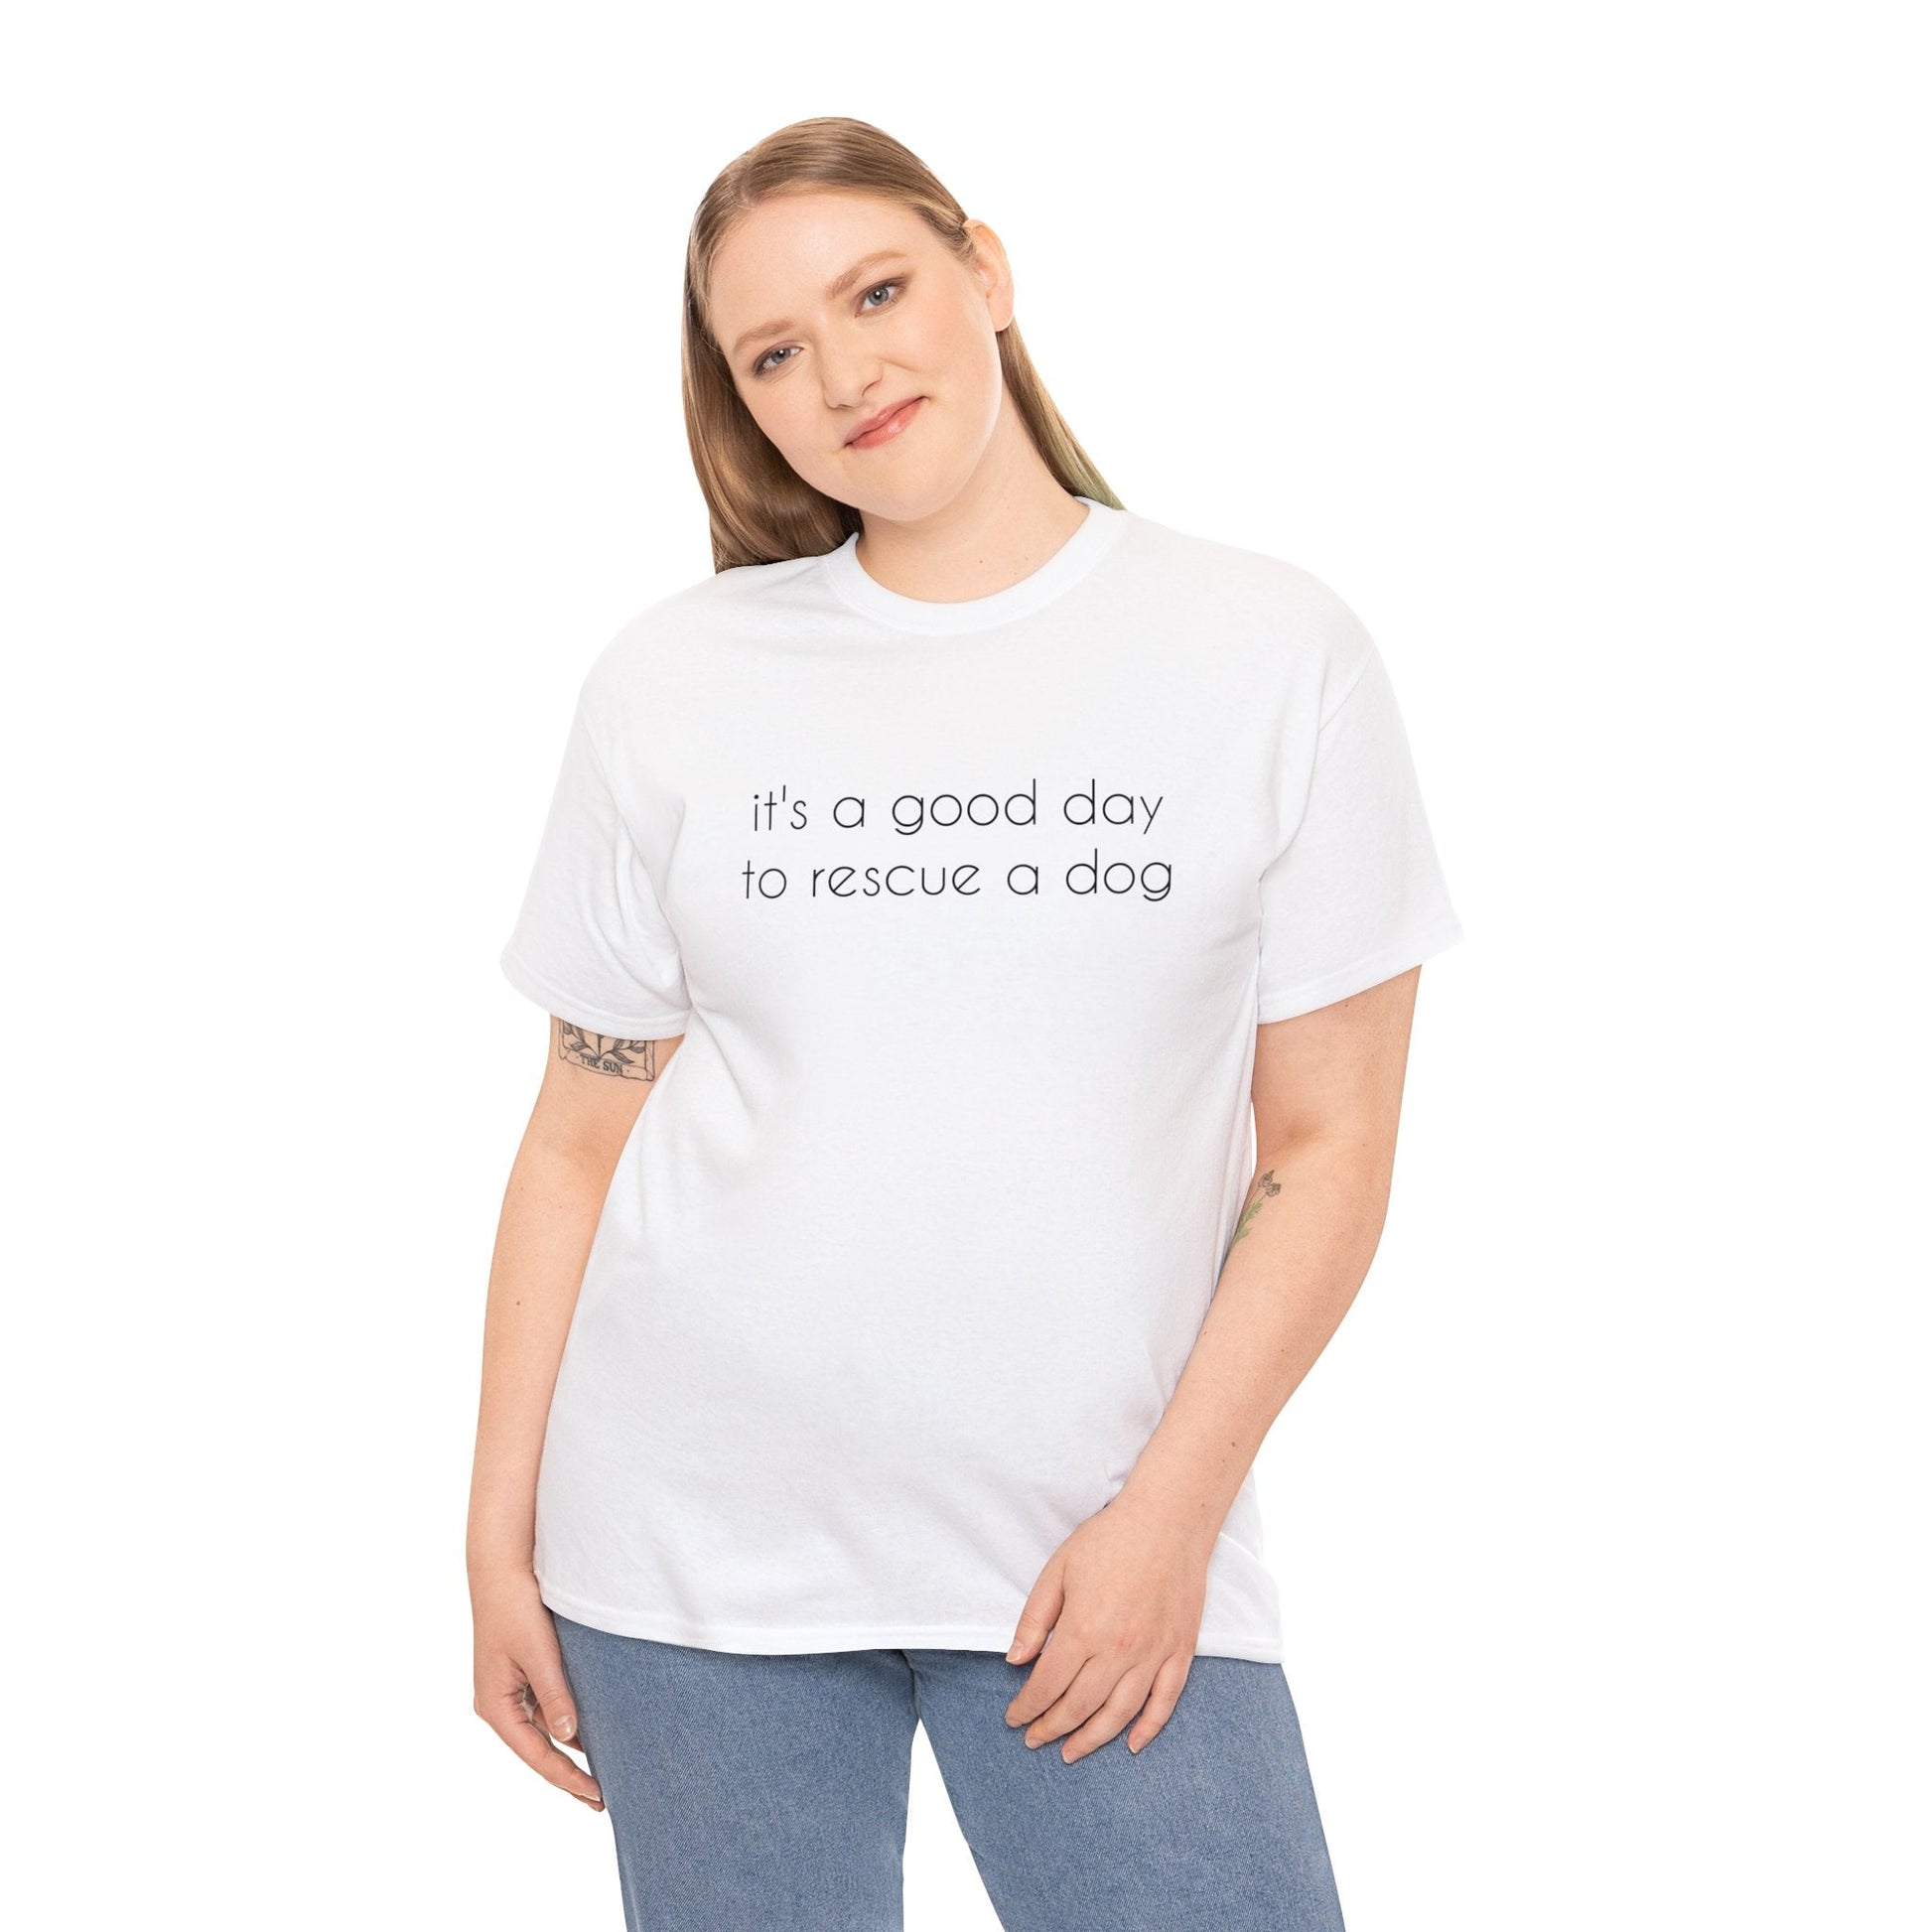 It's A Good Day To Rescue A Dog | Text Tees - Detezi Designs-31365489065919311920